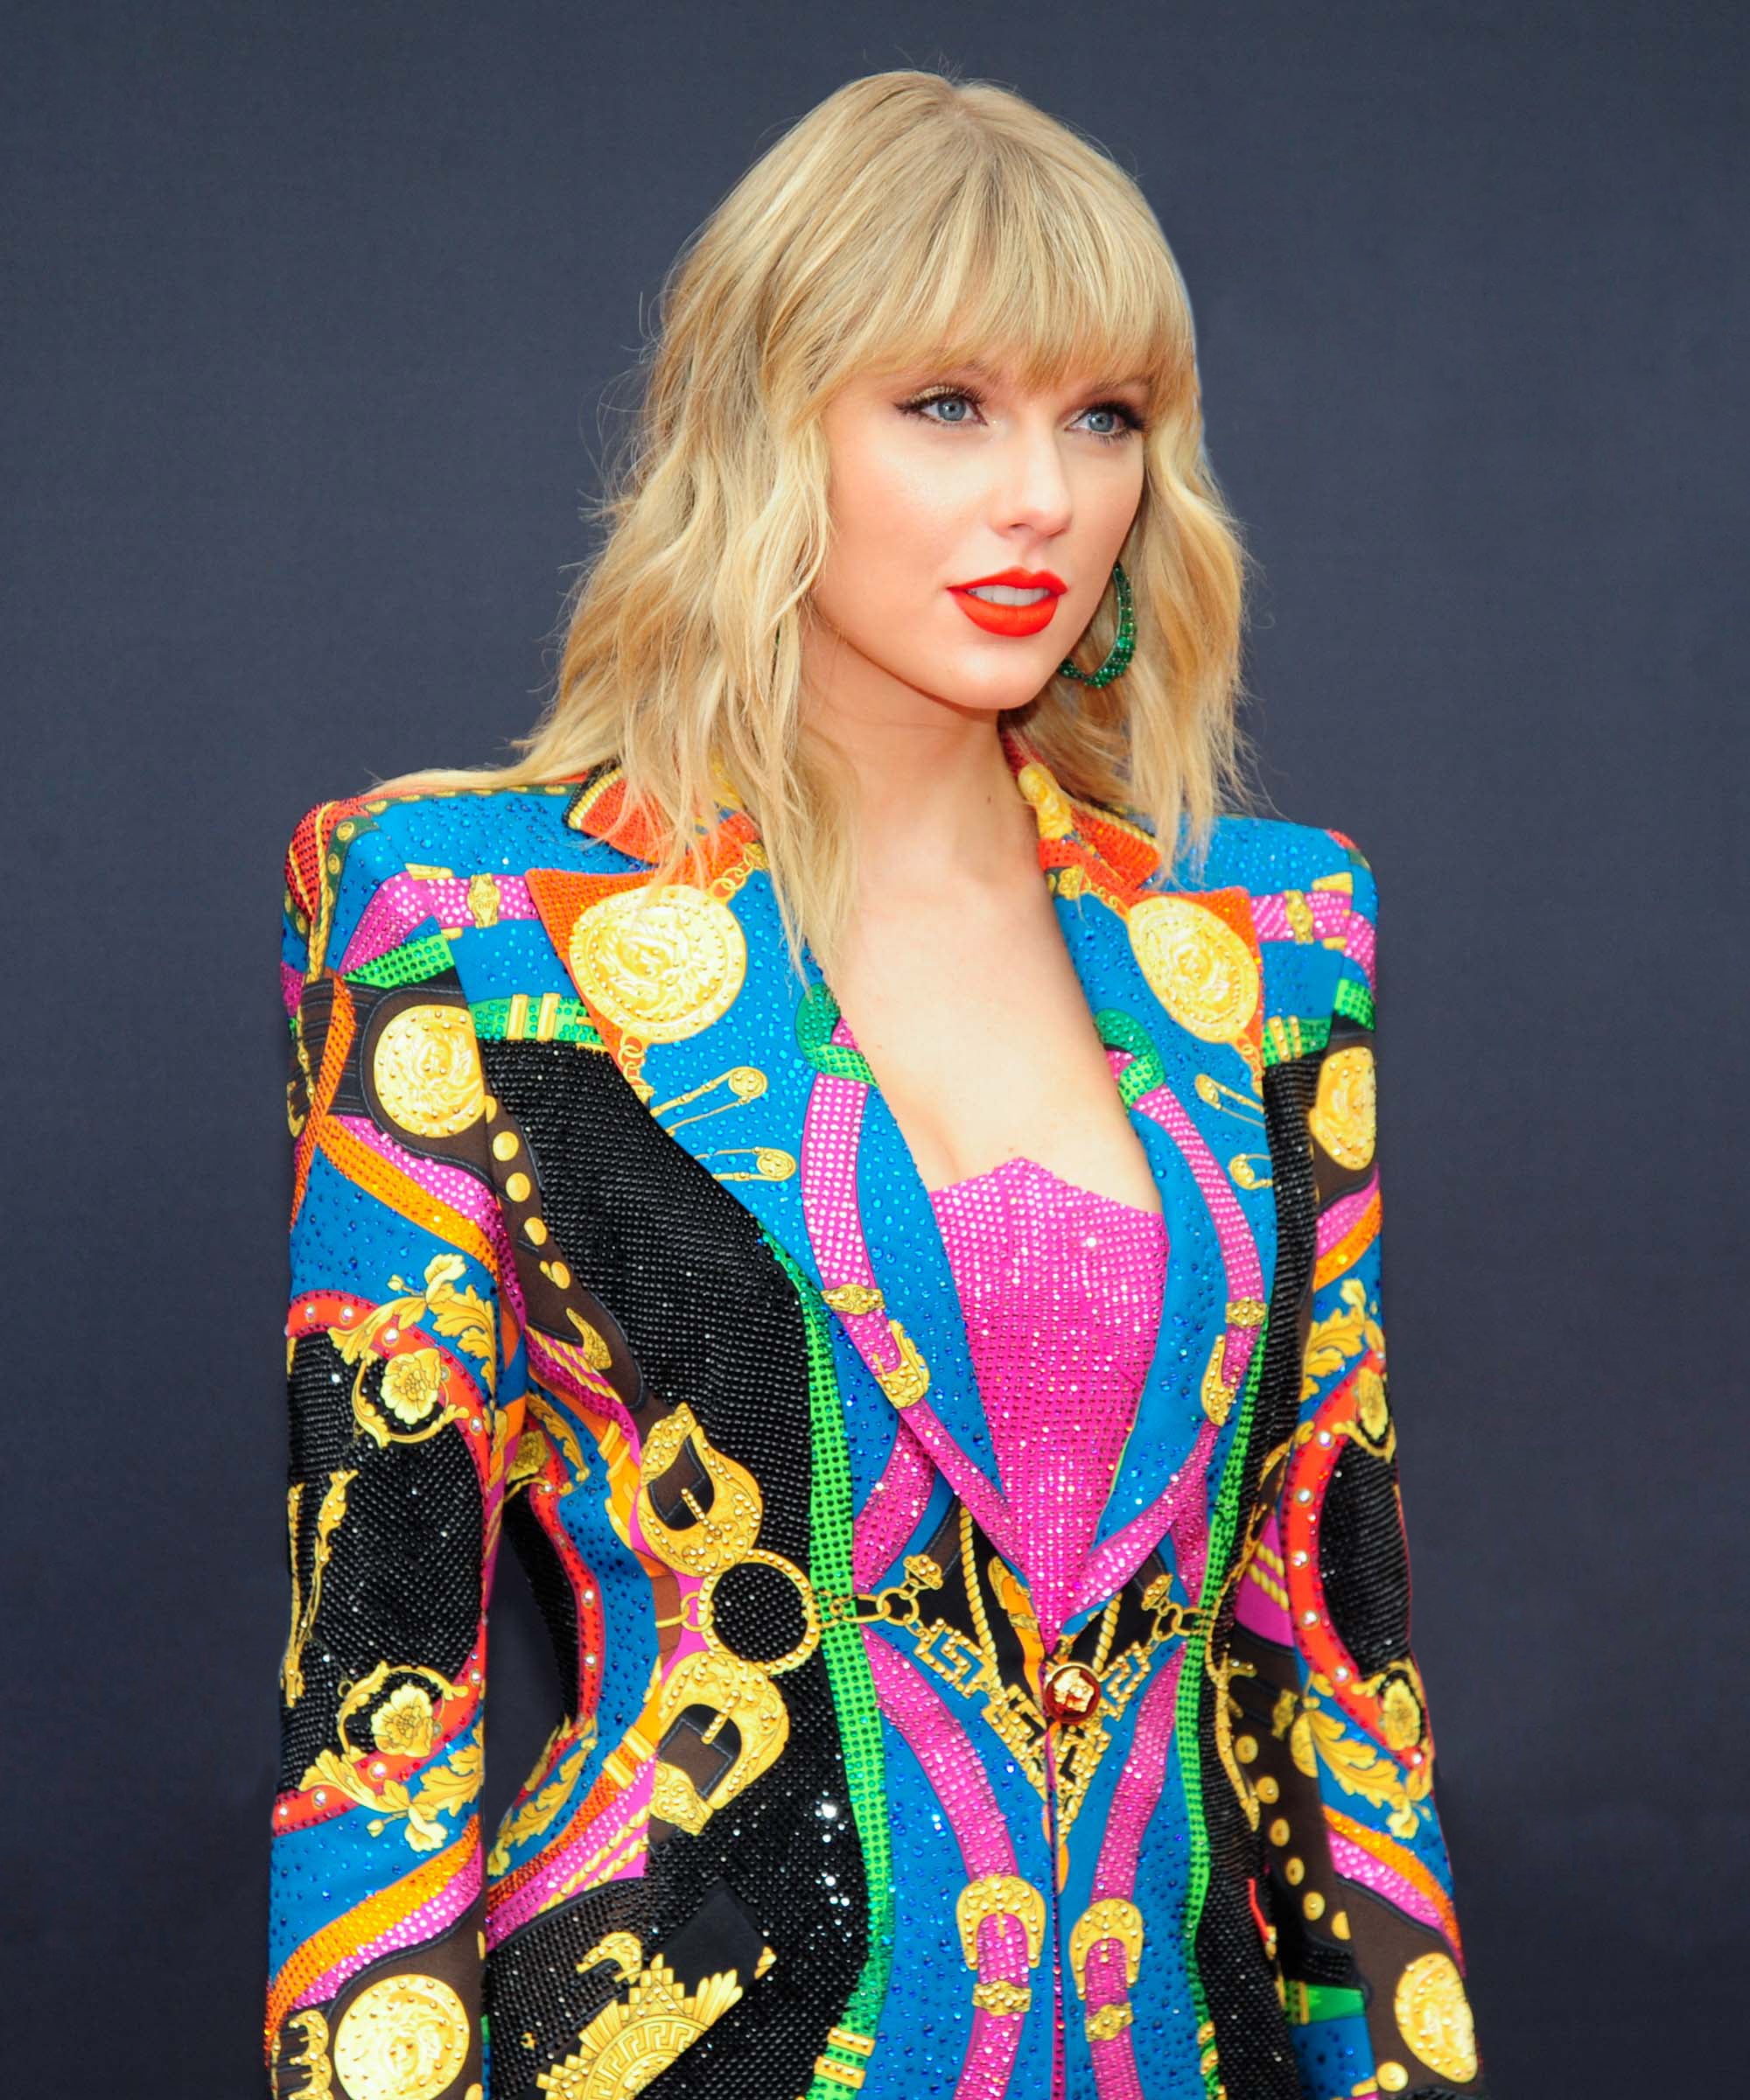 Taylor Swift Joins The Voice As Mentor